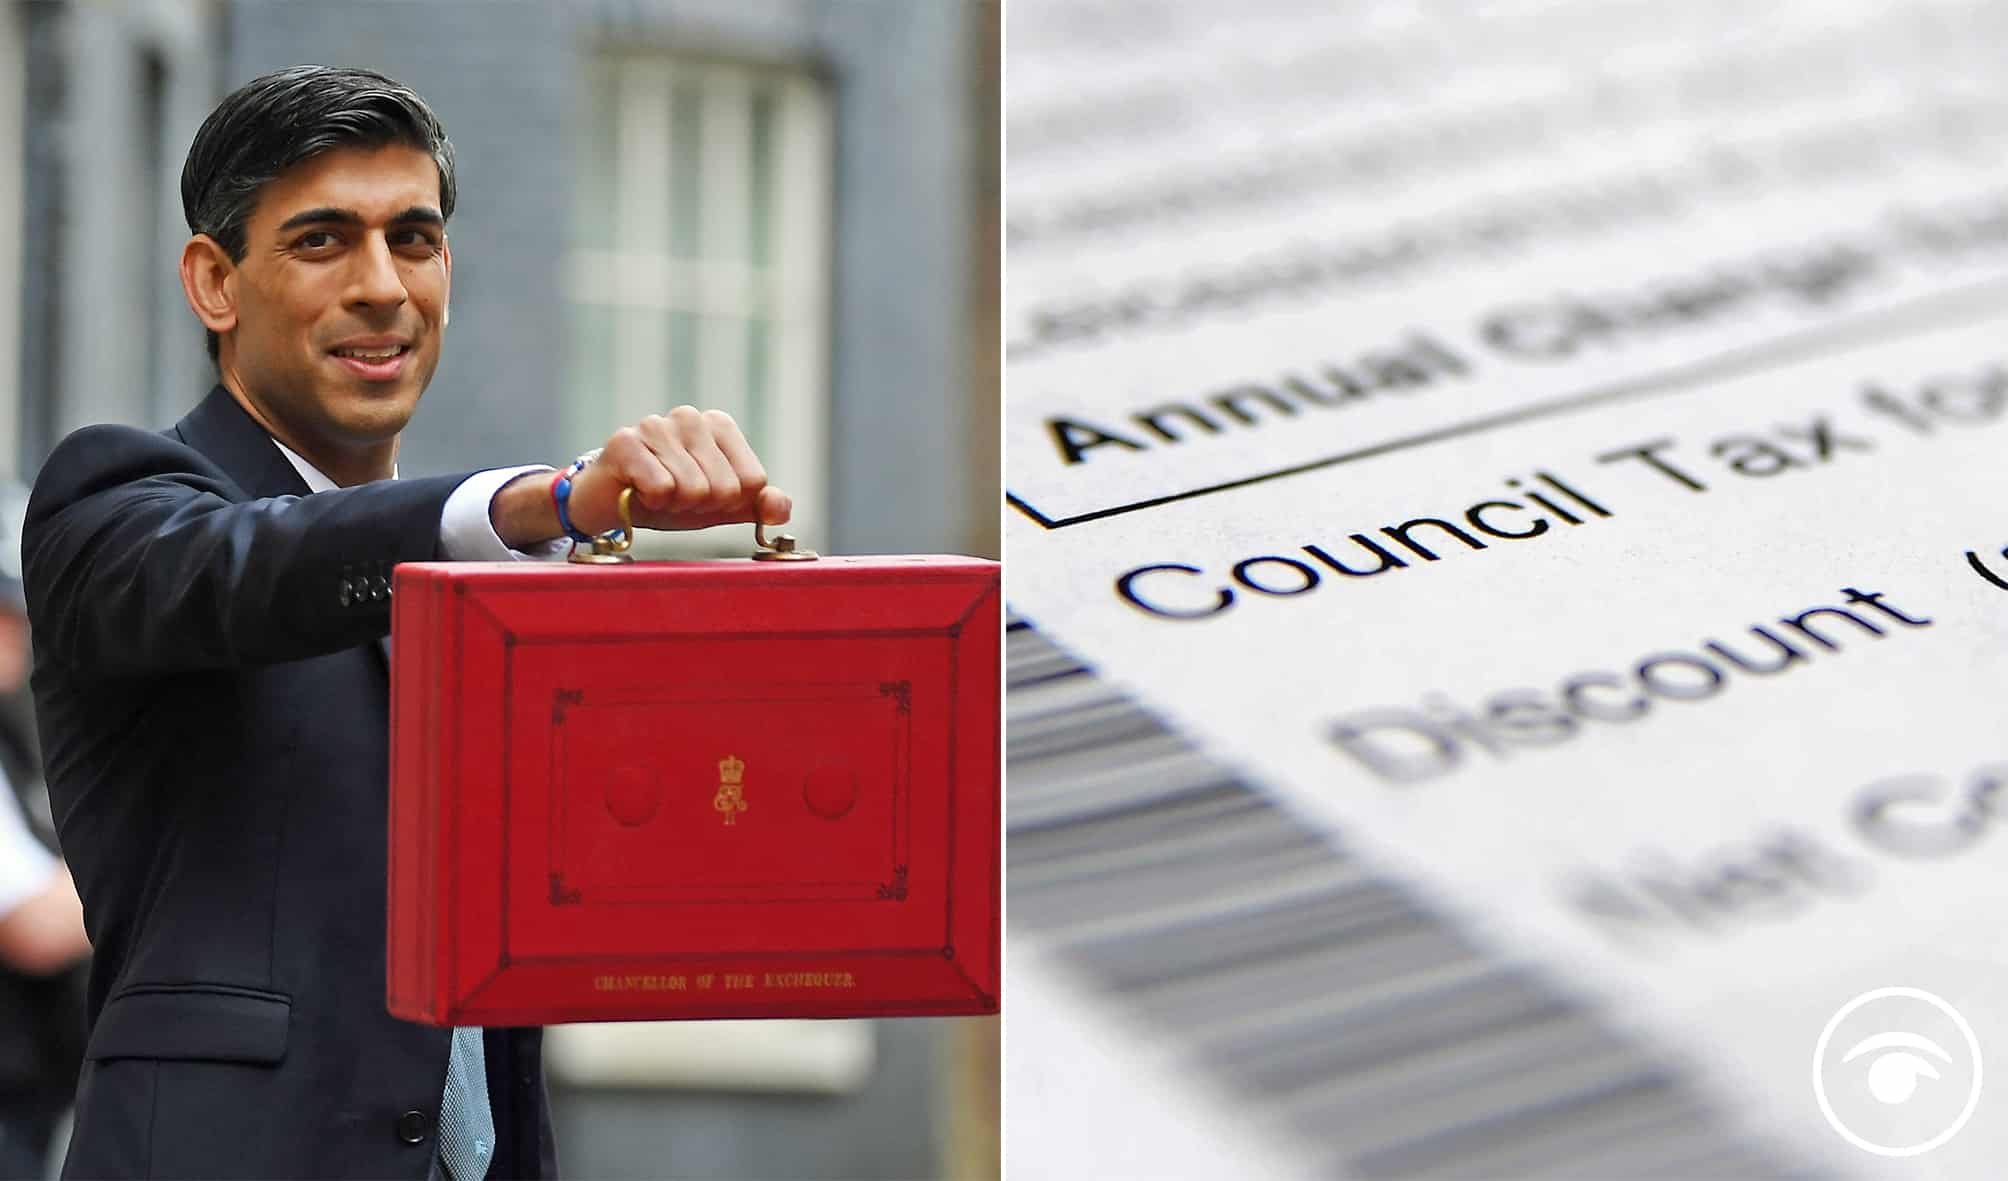 ‘Economically illiterate’ – Government slammed over plans to ‘increase council tax’